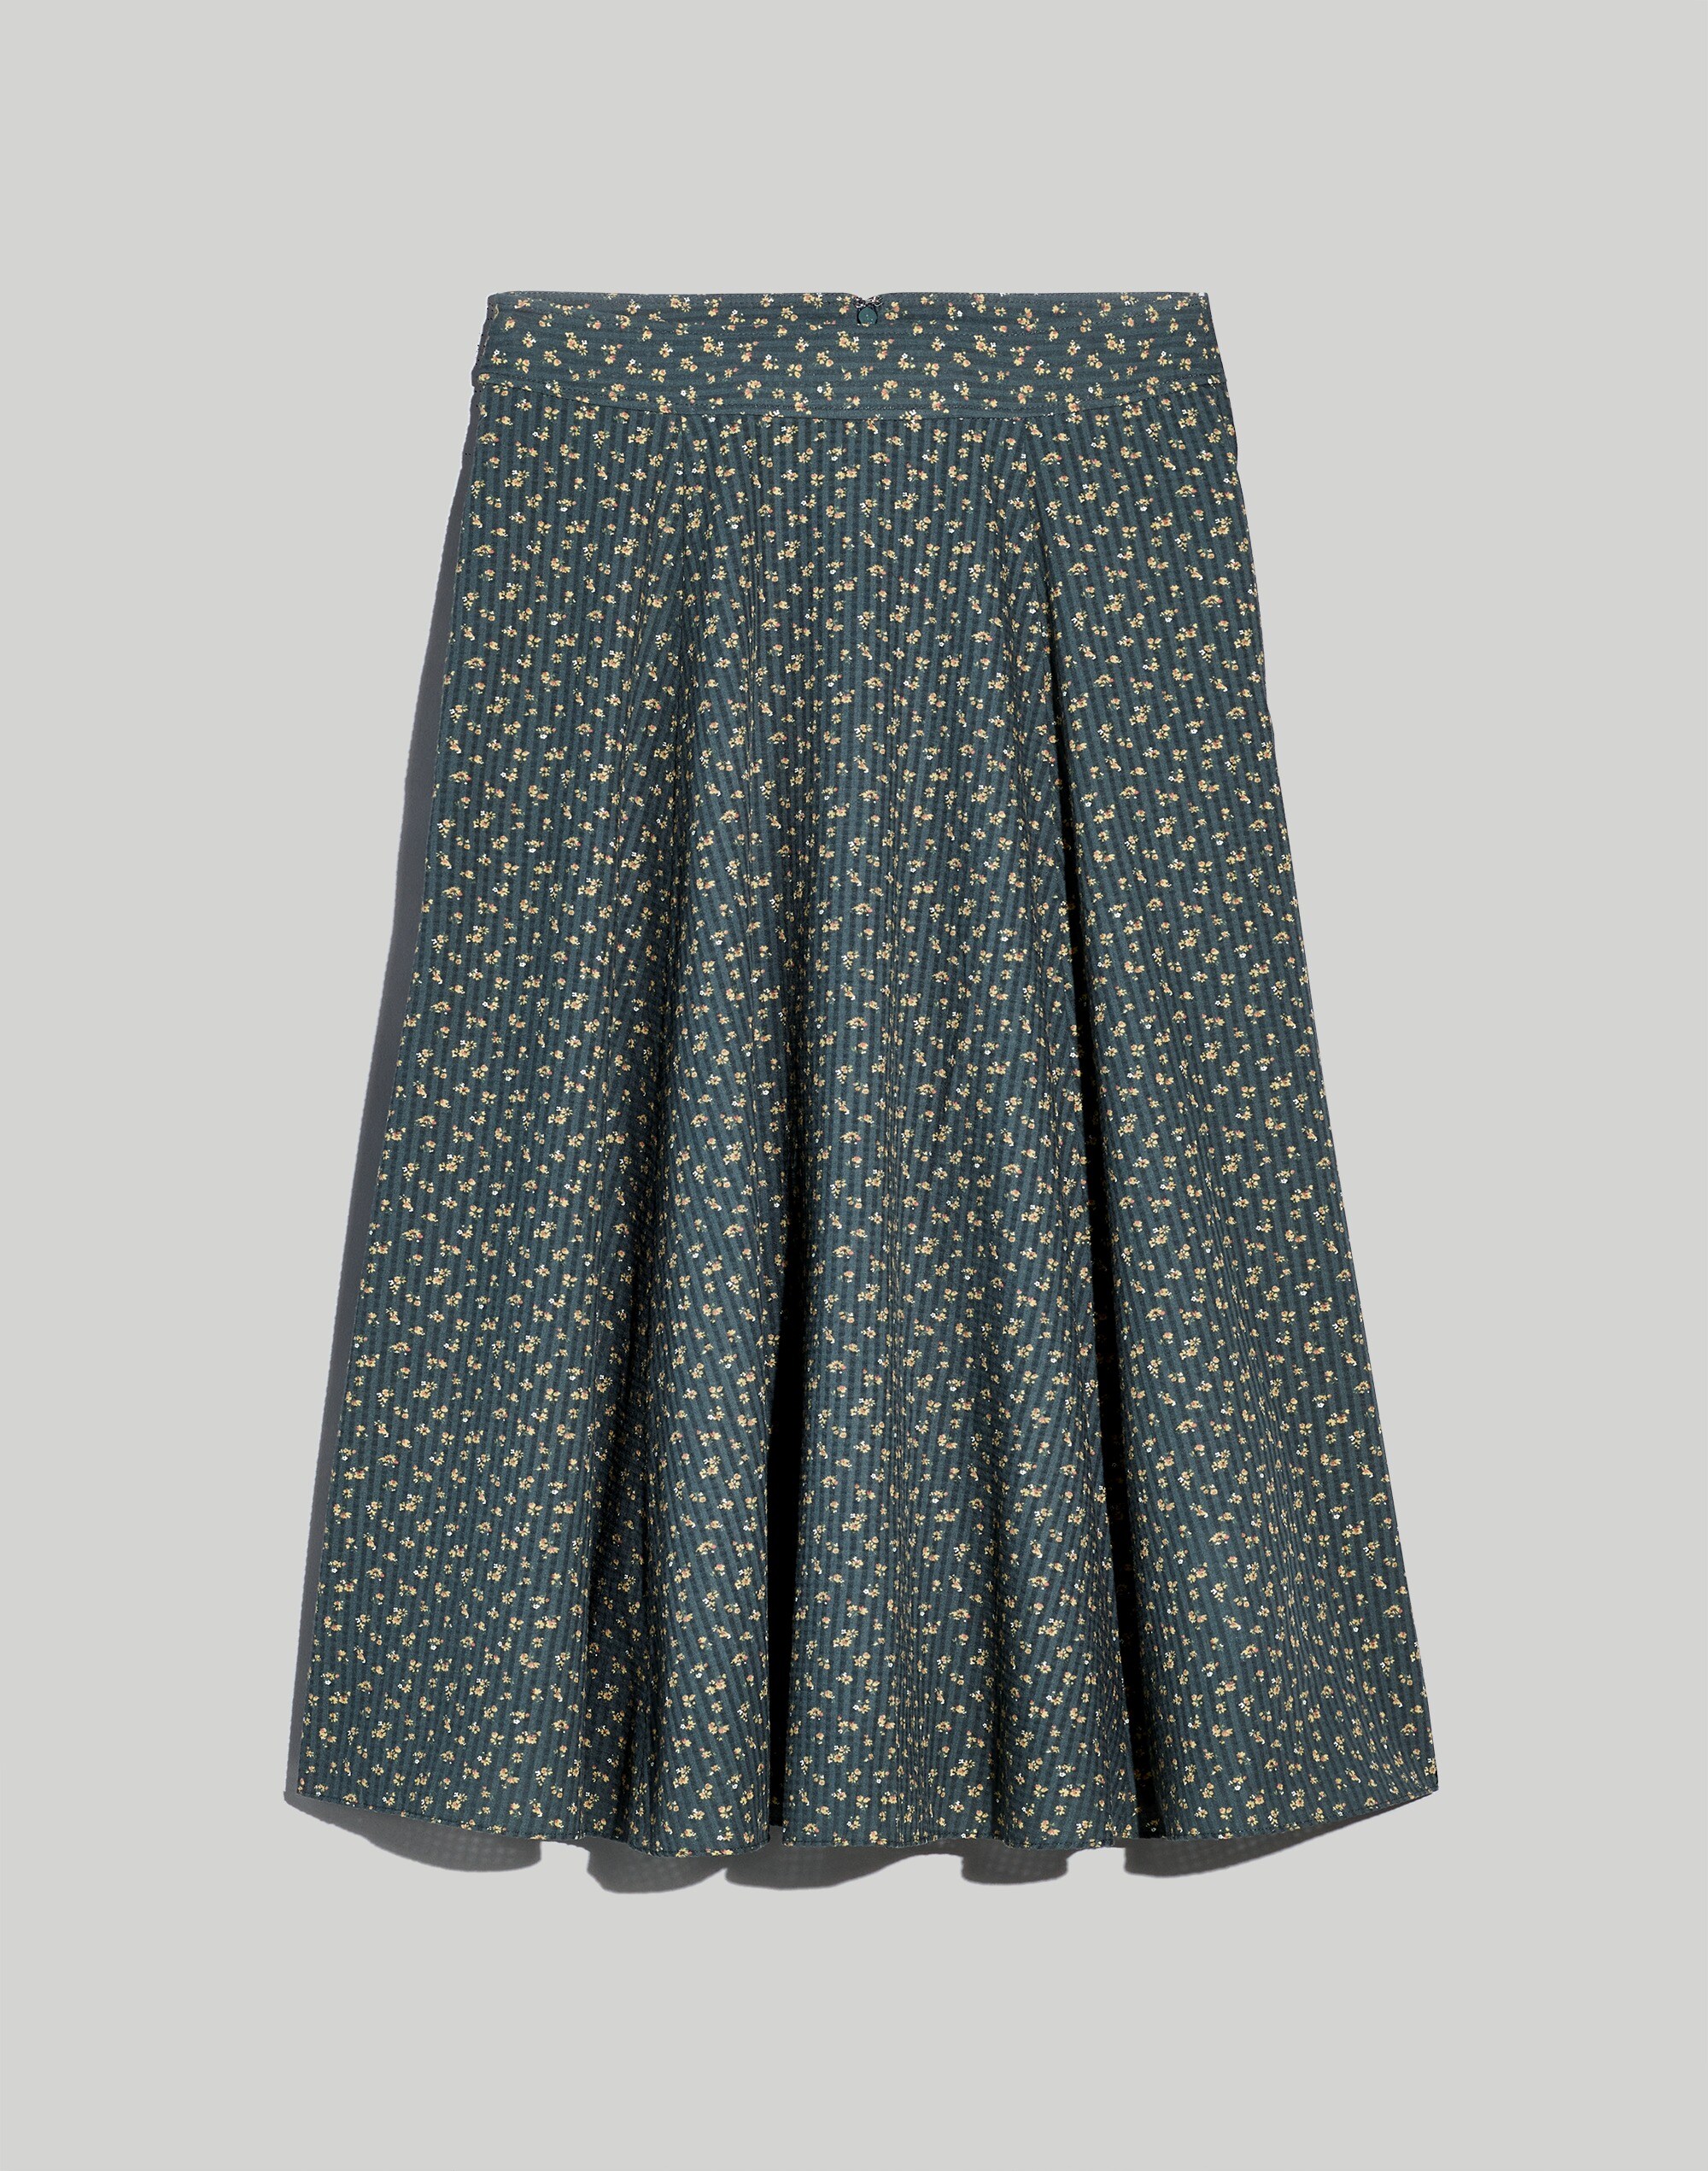 Cotton Voile Maxi Skirt in Bitsy Bouquet